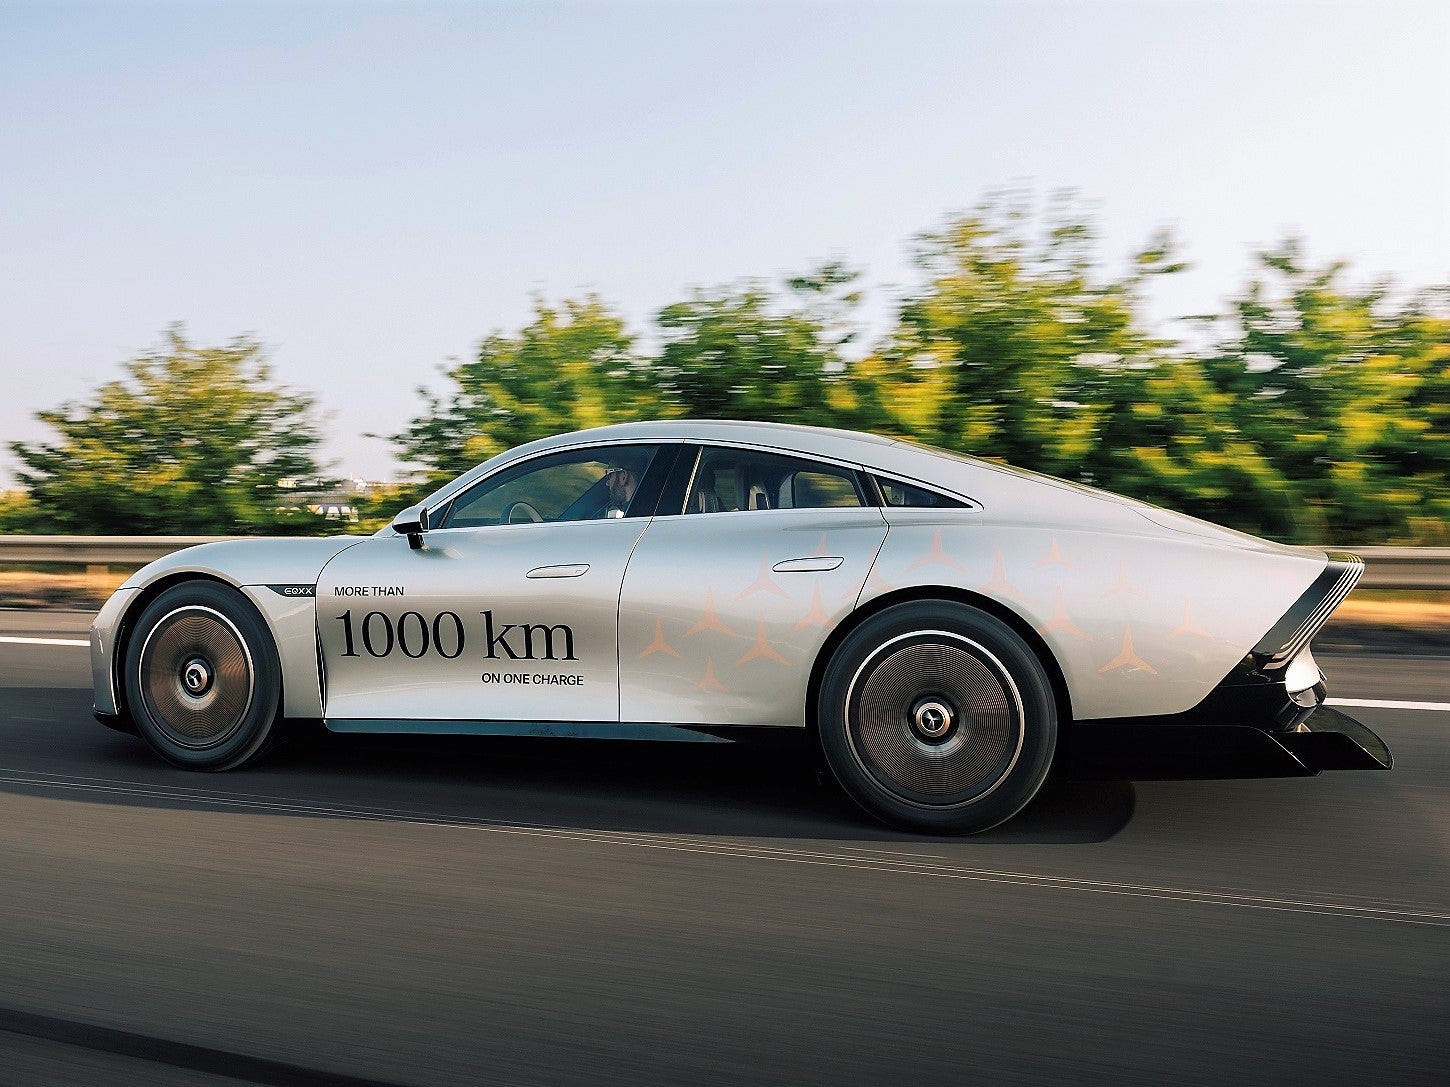 The Mercedes Vision EQXX broke its own efficiency record of 1,202km in a road trip from Stuttgart (Germany) to Silverstone (UK) on a single battery charge on 22 June, 2022